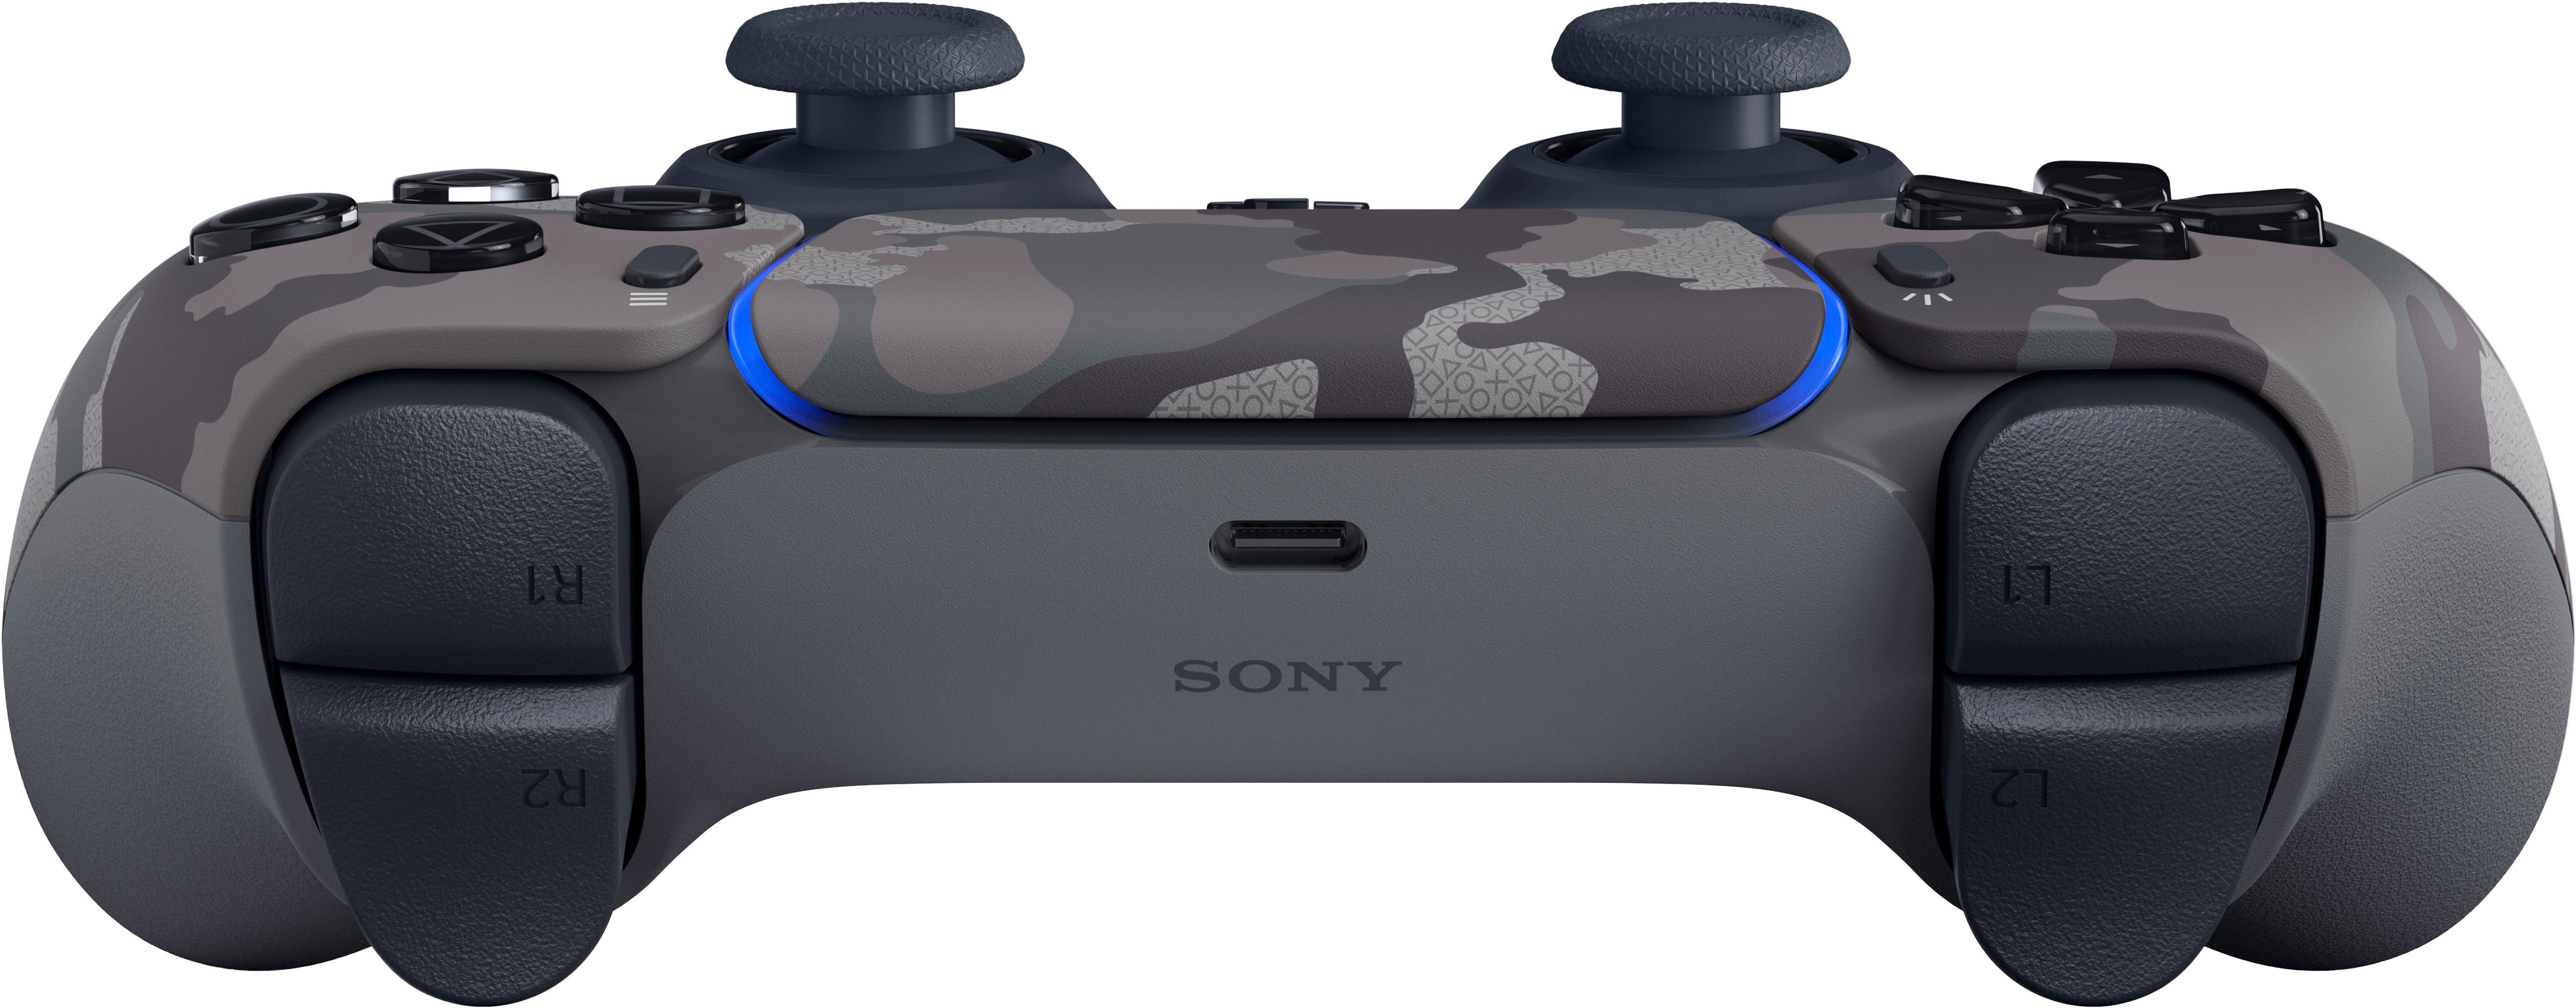 Back View: Sony - PlayStation 5 - DualSense Wireless Controller - Gray Camouflage